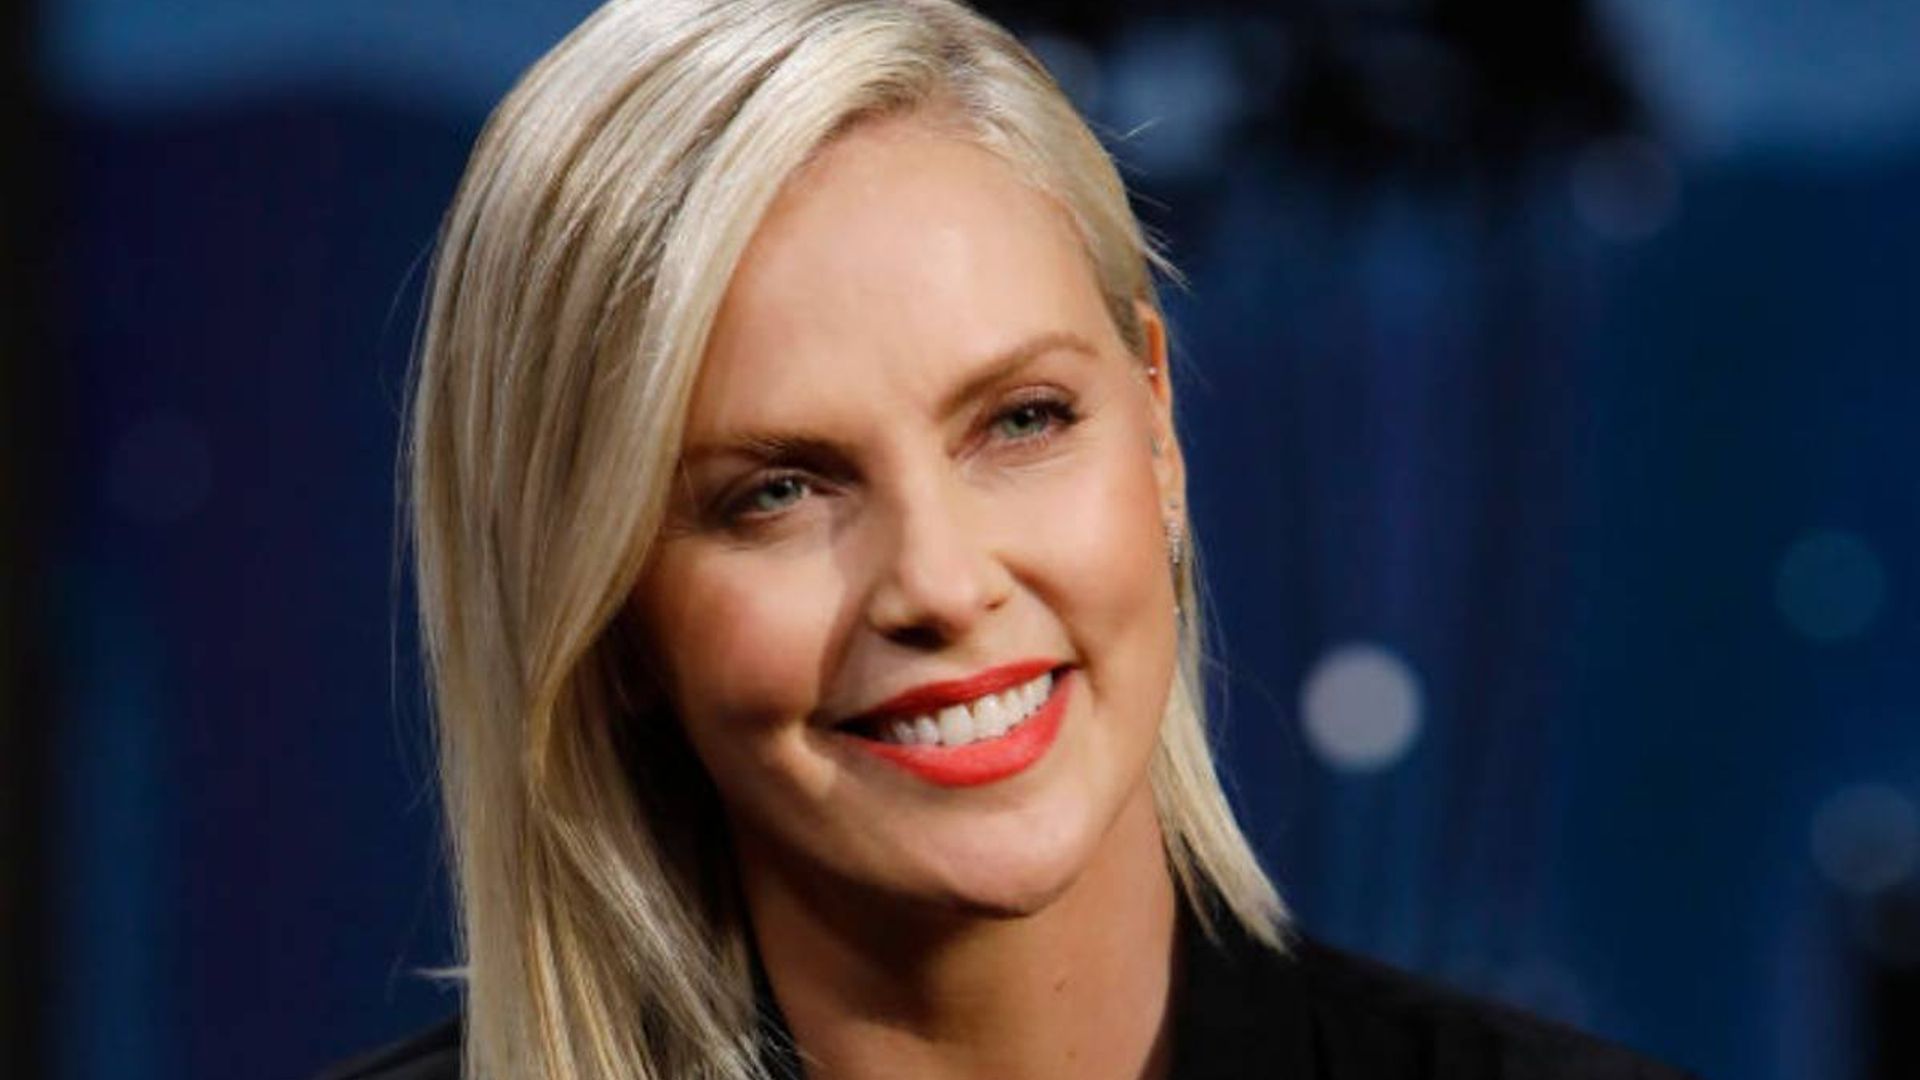 charlize-theron-smiling-daughter-photo